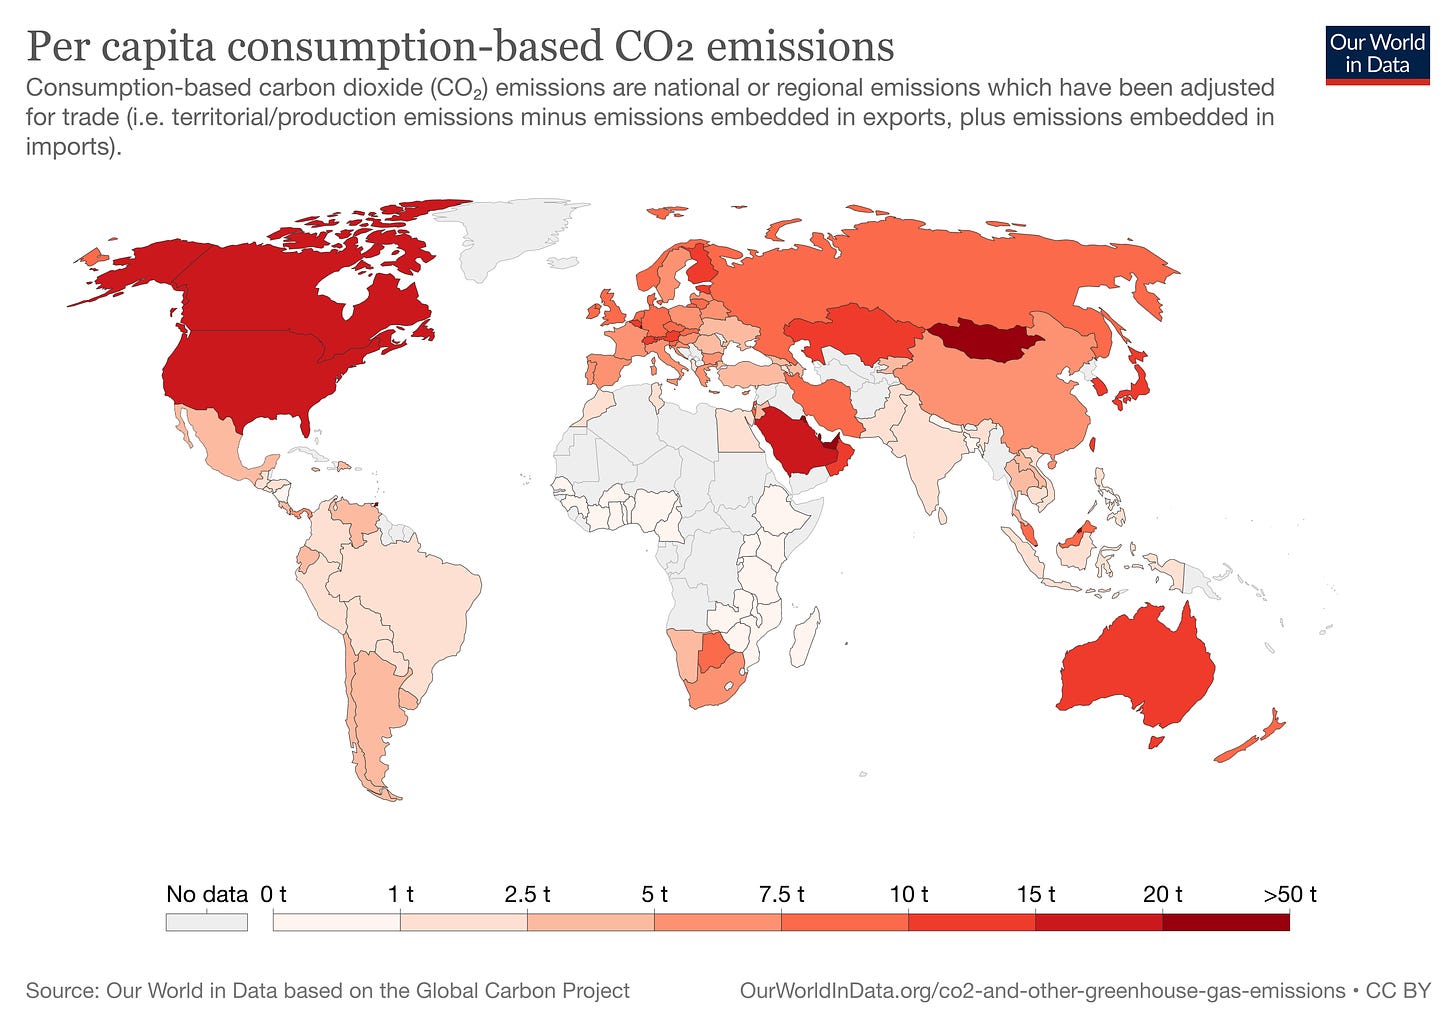 A colour coded map of per capita consumption-based CO2 emissions: the darkest countries are Mongolia, the US, Canada, and the Middle East